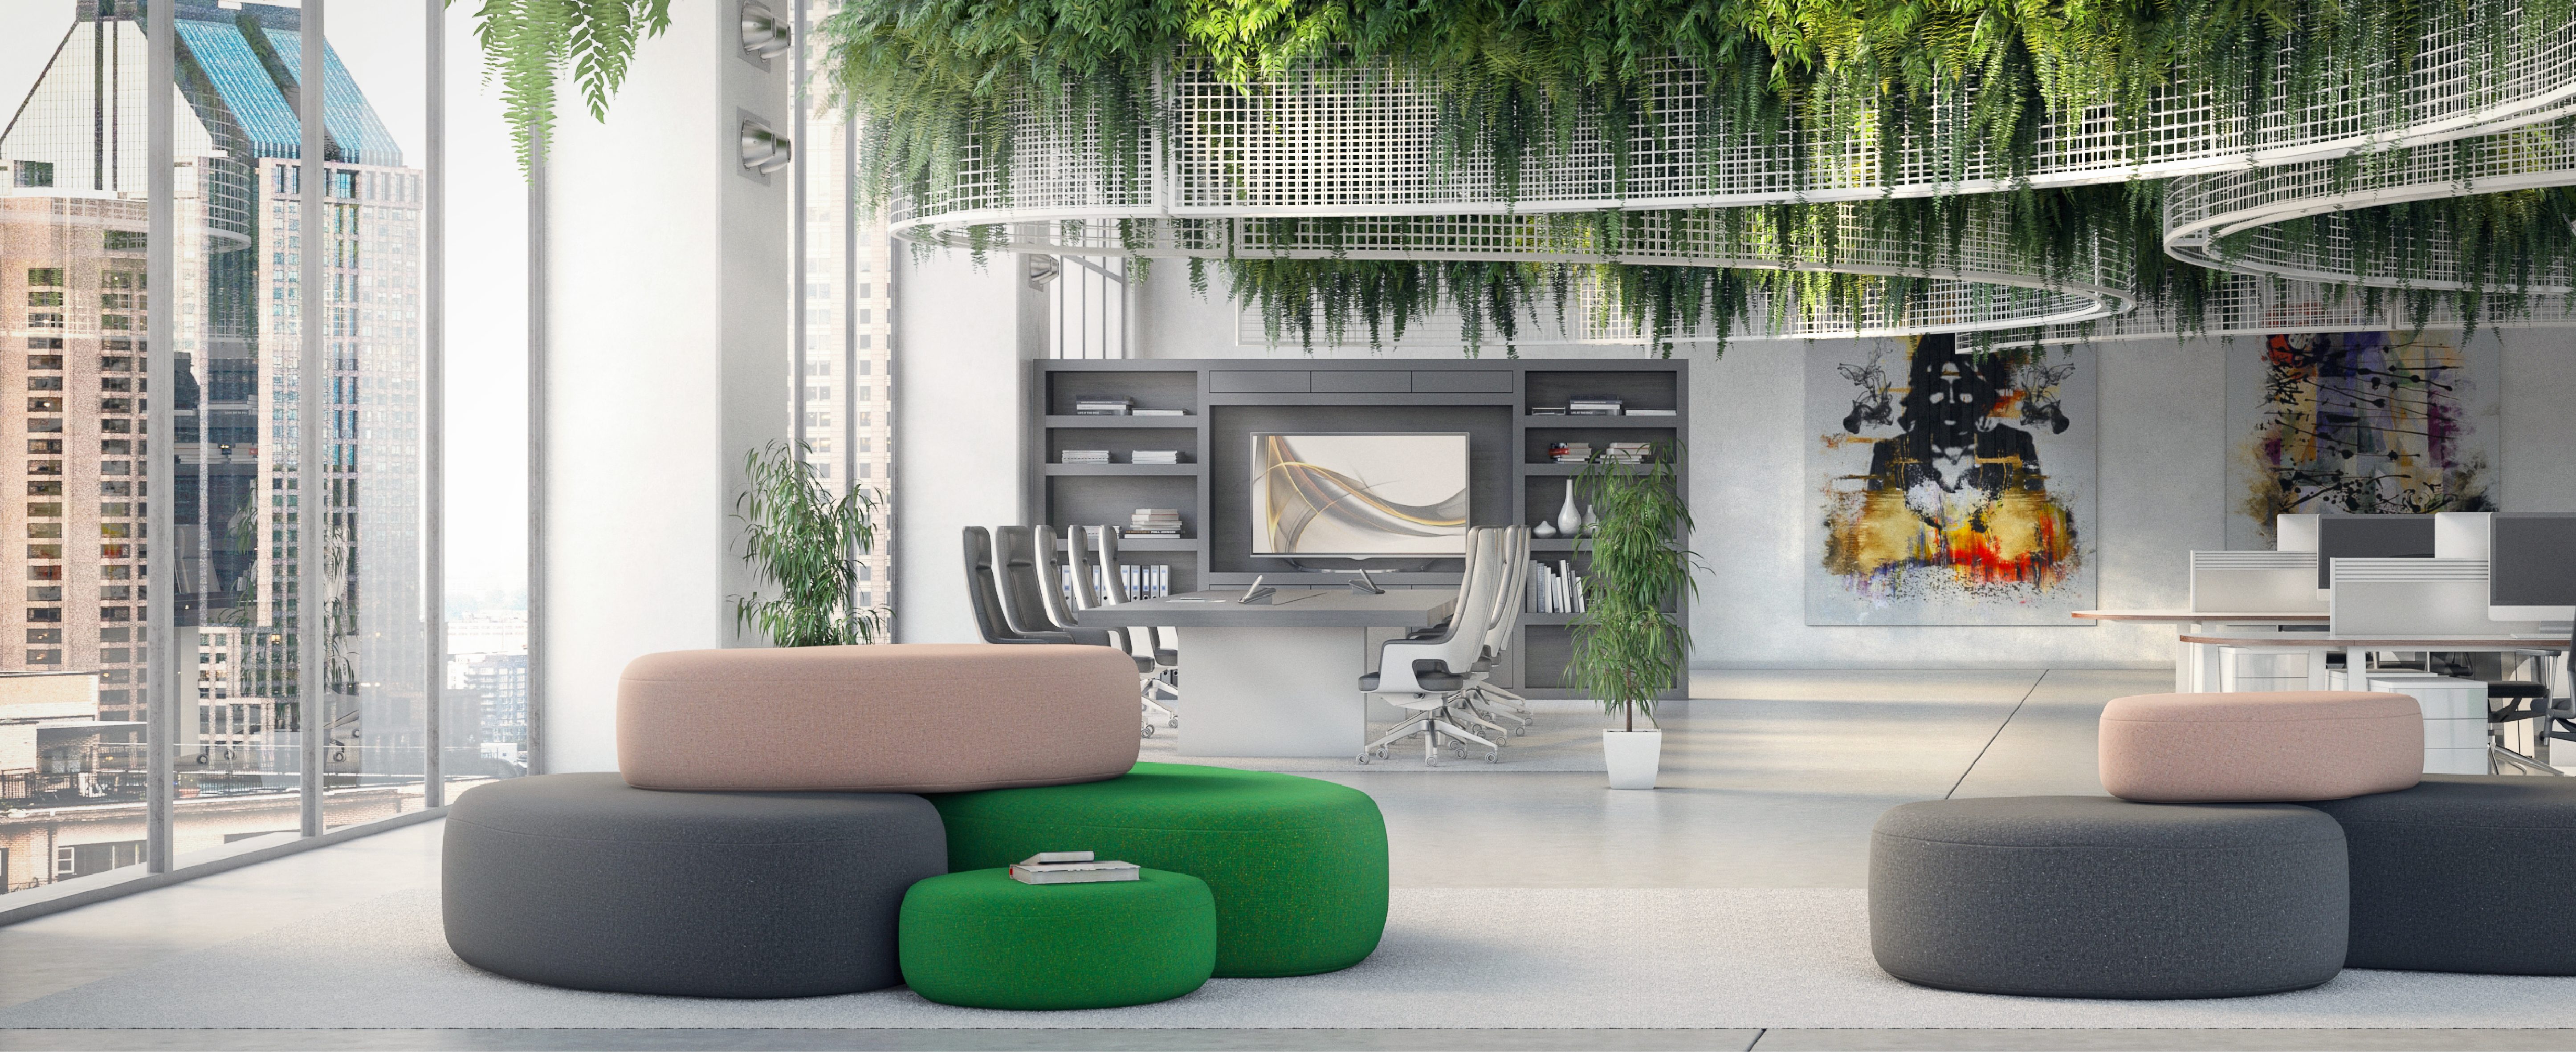 cairn ottoman seating collection in office environment